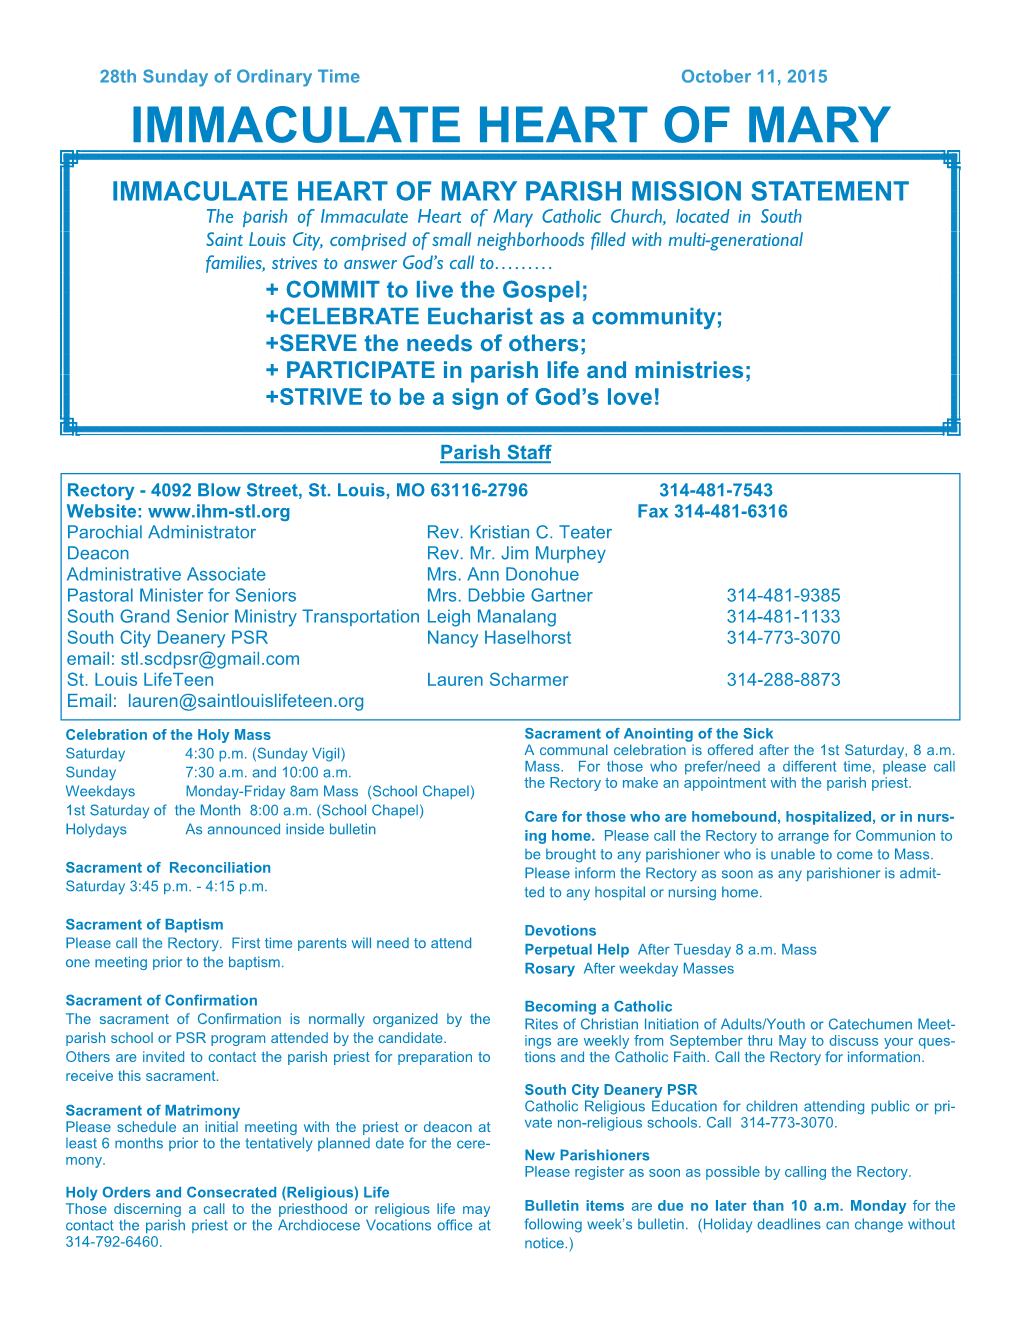 Immaculate Heart of Mary Parish Mission Statement